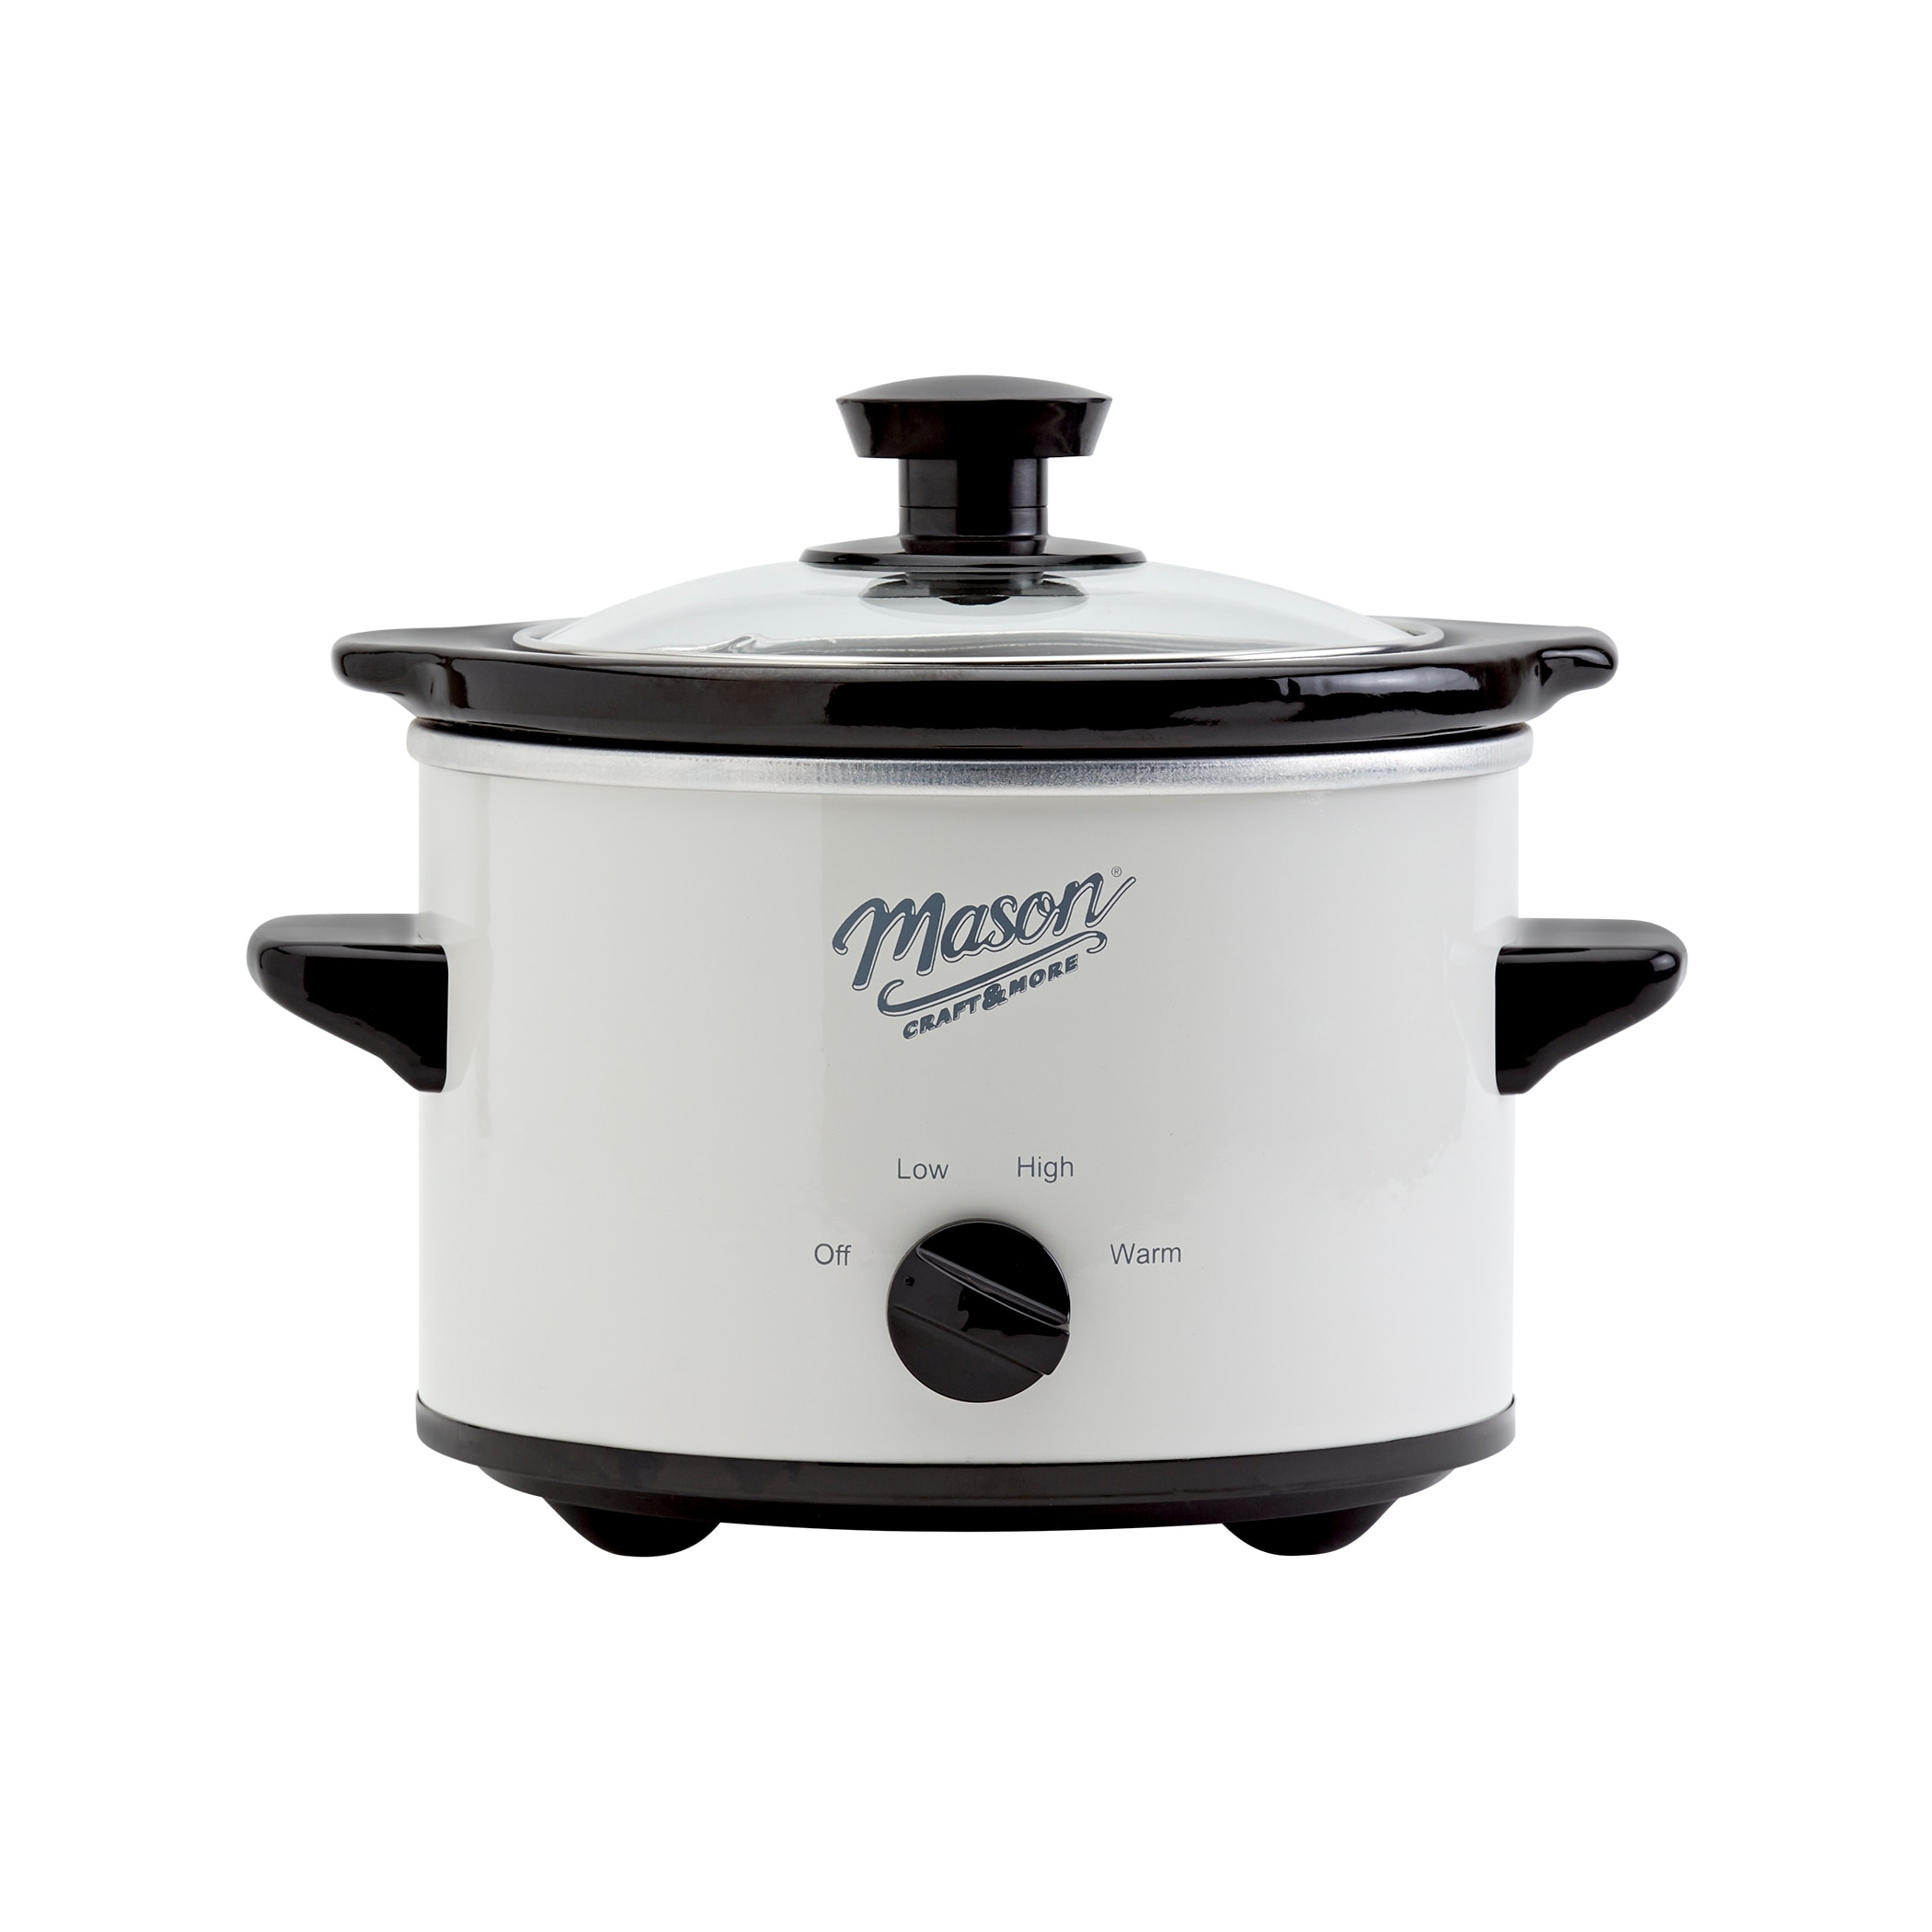 https://ak1.ostkcdn.com/images/products/is/images/direct/62fc0ebbef85671c7932c682b2a1aa08a30627ec/Mason-Craft-%26-More-1.5qt-Slow-Cooker---White.jpg